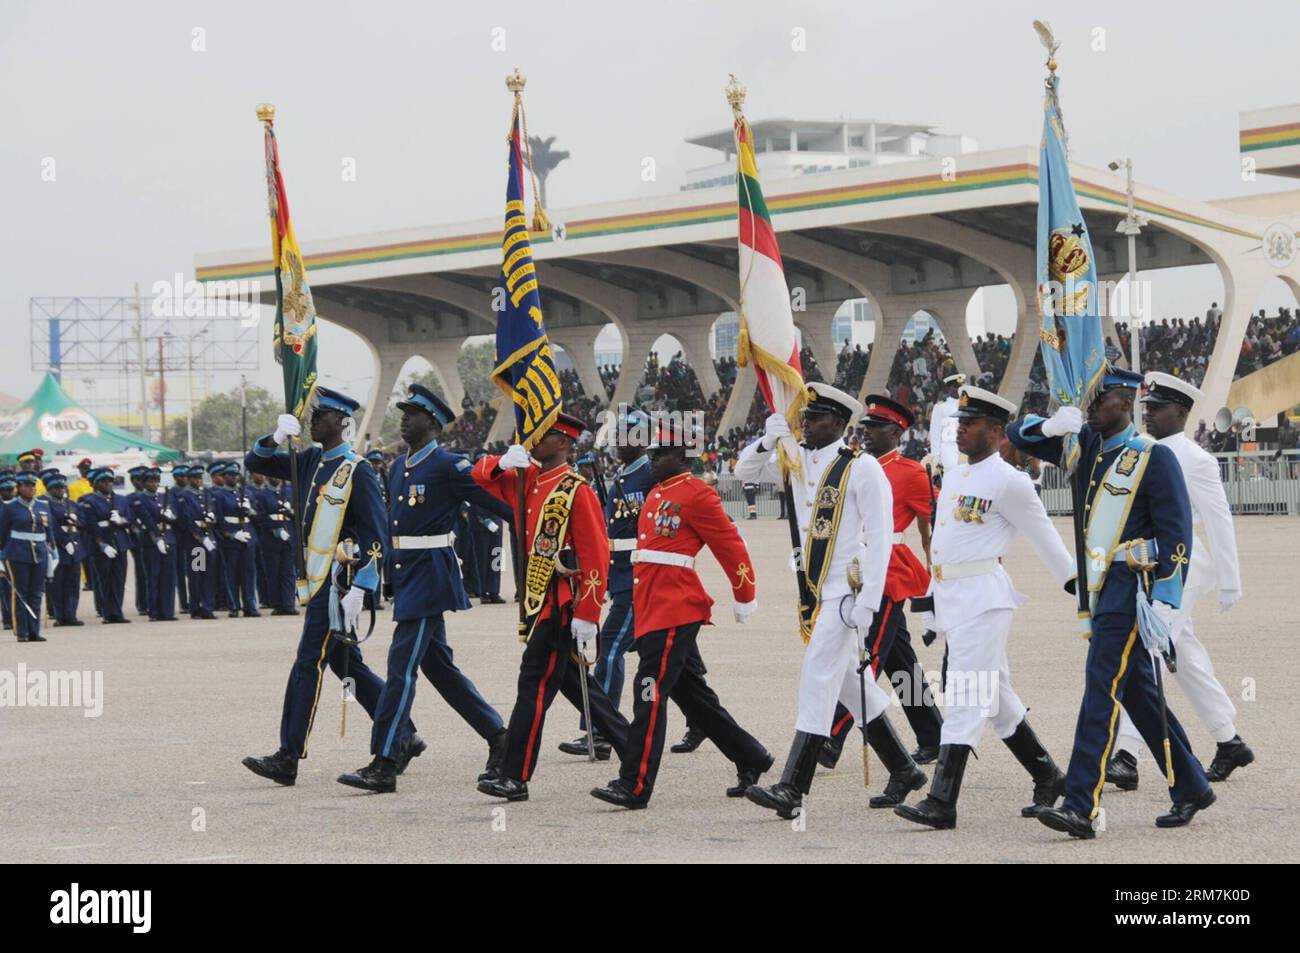 (140306) -- ACCRA, Mar. 6, 2014 (Xinhua) -- A guard of honor of Ghana Armed Forces parade at the Independence Square in Accra, Ghana, on March 6, 2014. Heavy rains that lasted over an hour interrupted the 57th Independence Day celebration of Ghana here on Thursday. (Xinhua/Lin Xiaowei) GHANA-INDEPENDENCE DAY-HEAVY RAIN PUBLICATIONxNOTxINxCHN   Accra Mar 6 2014 XINHUA a Guard of HONOR of Ghana Armed Forces Parade AT The Independence Square in Accra Ghana ON March 6 2014 Heavy Rains Thatcher lasted Over to hour interrupted The 57th Independence Day Celebration of Ghana Here ON Thursday XINHUA Li Stock Photo